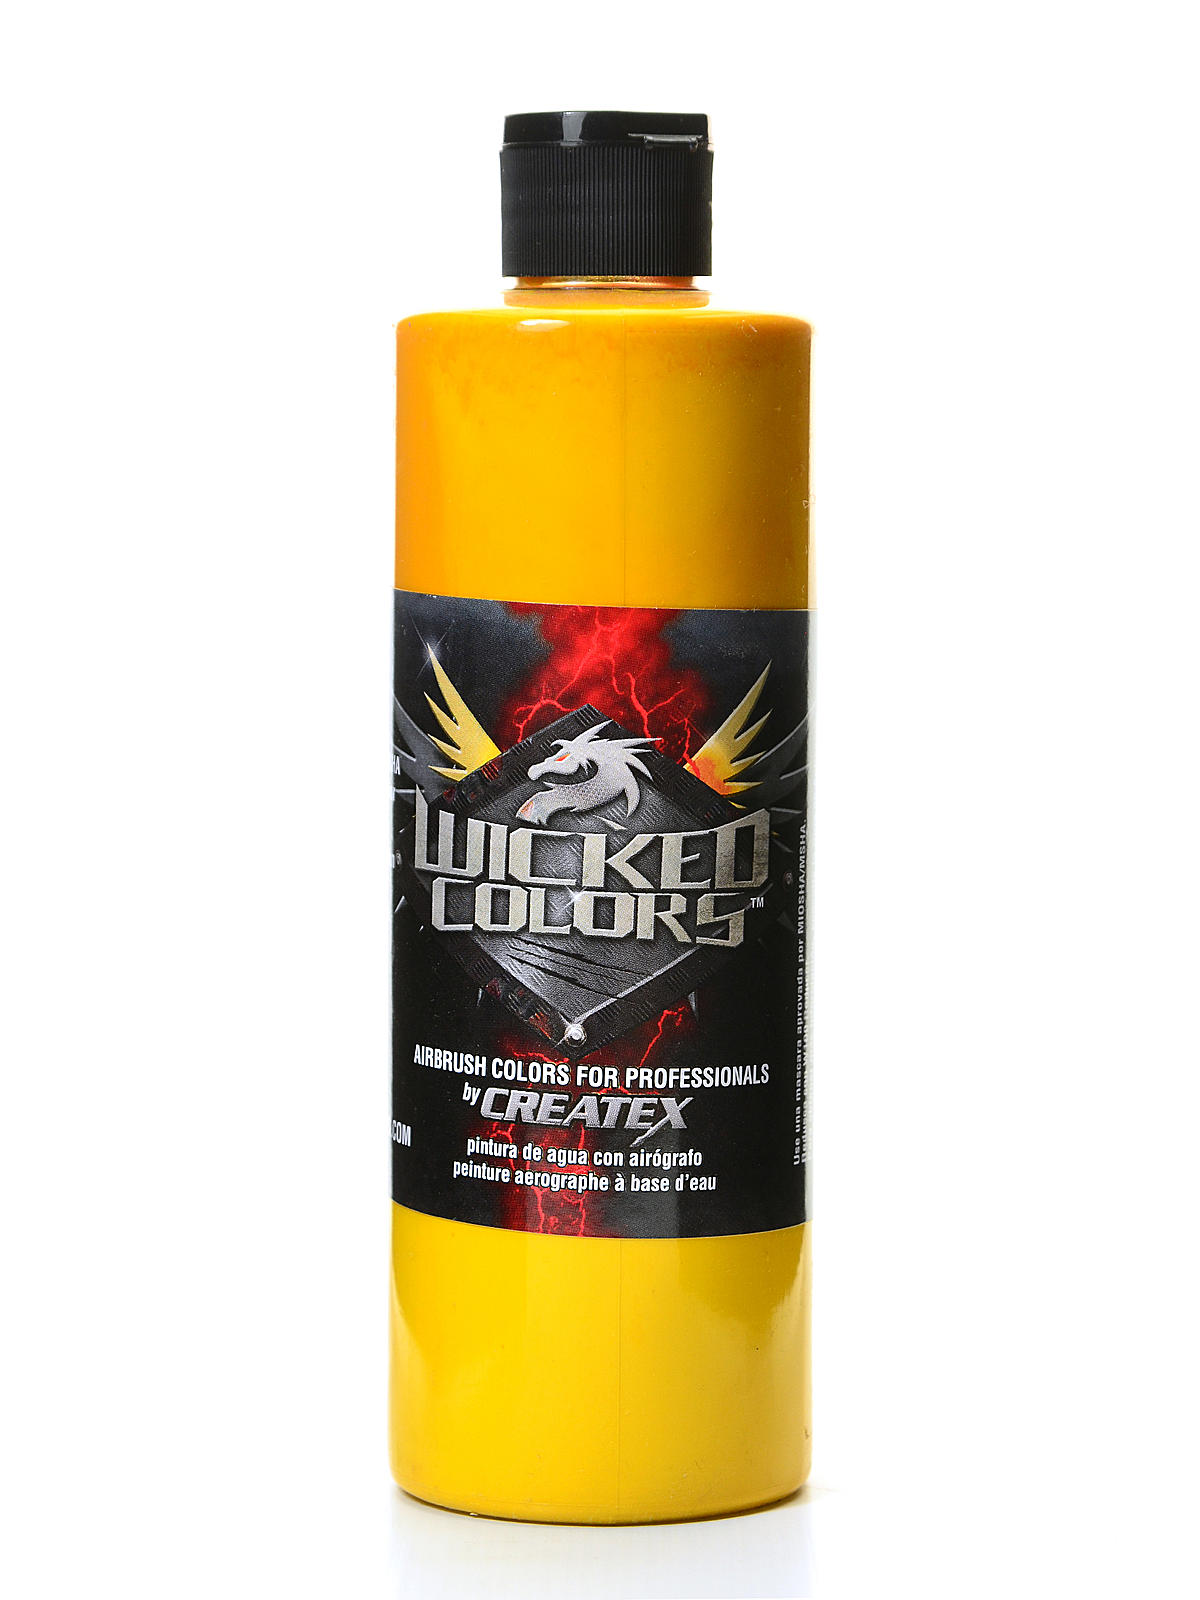 Wicked Colors Golden Yellow 16 Oz.